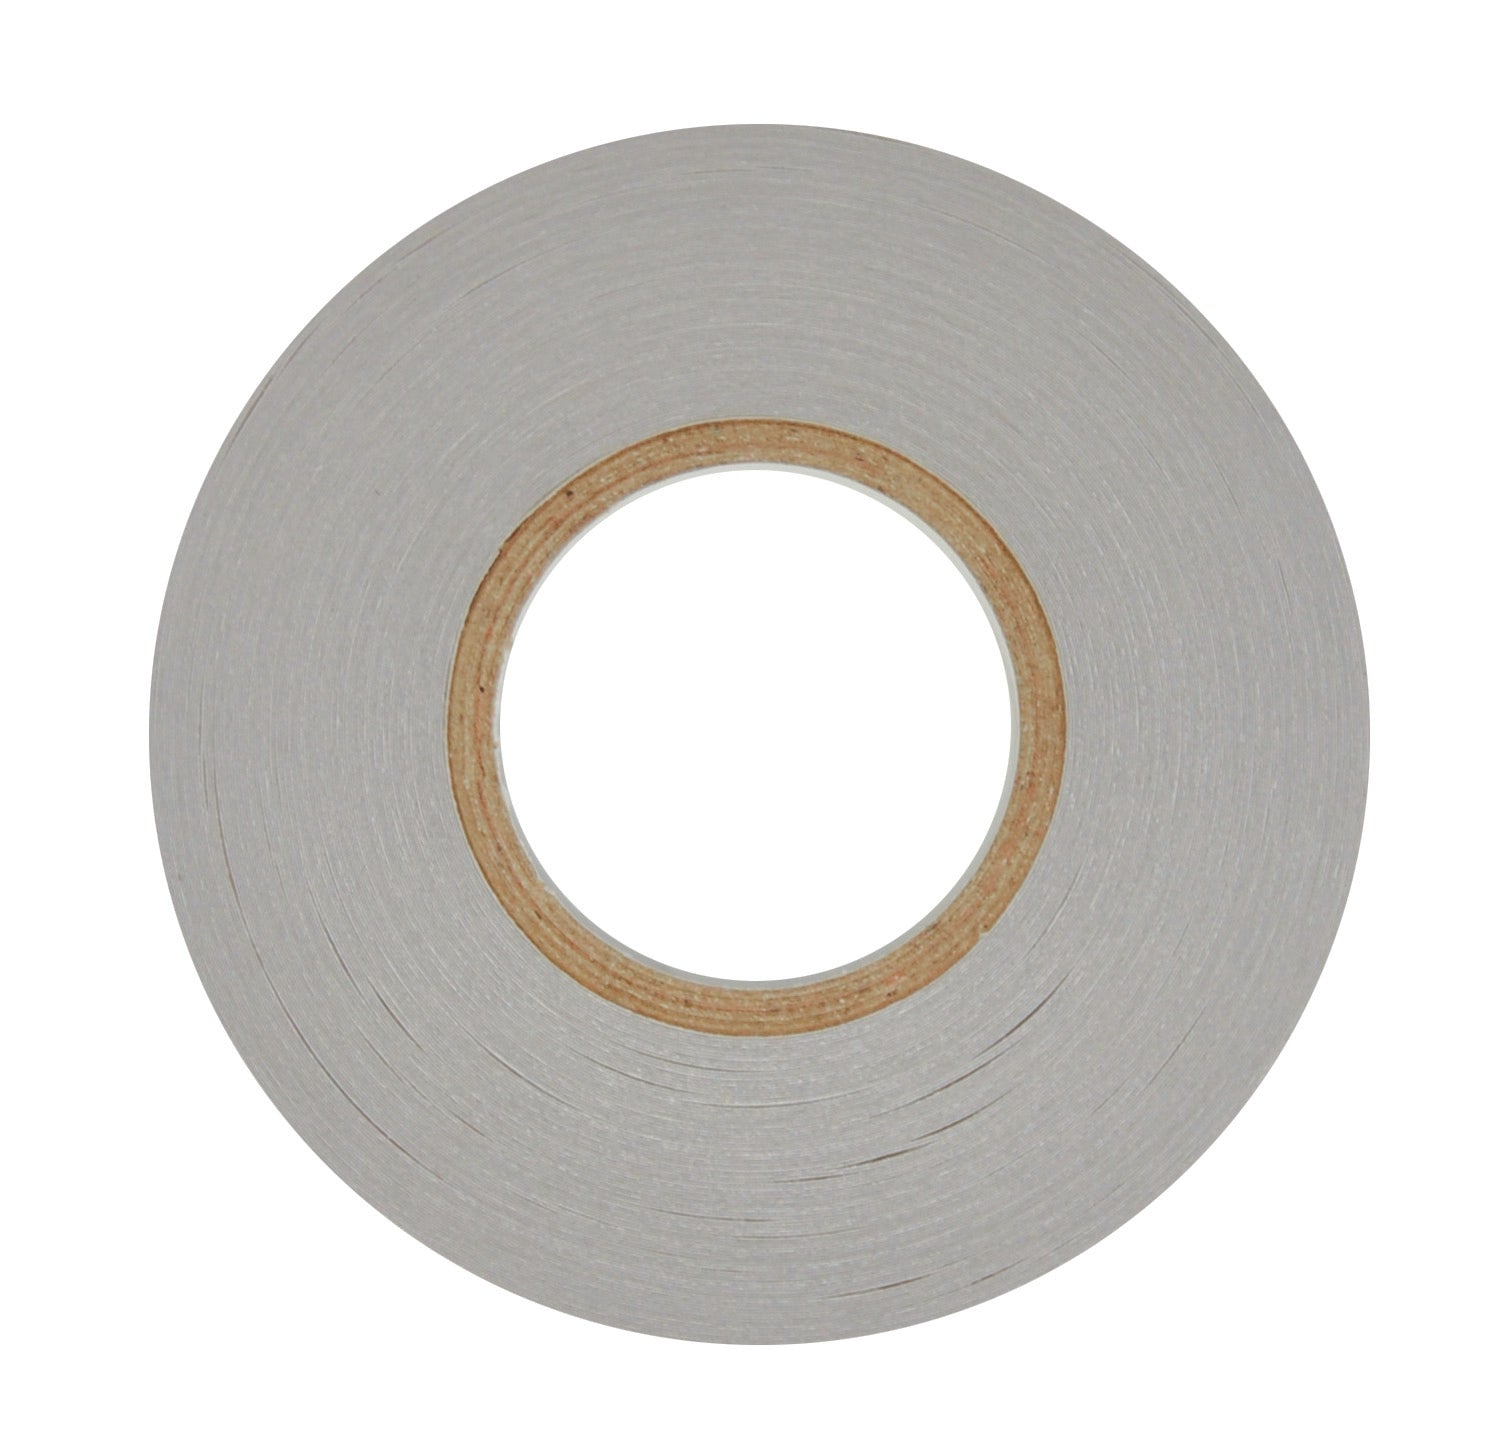 Double Sided Tape - 6mmx18m